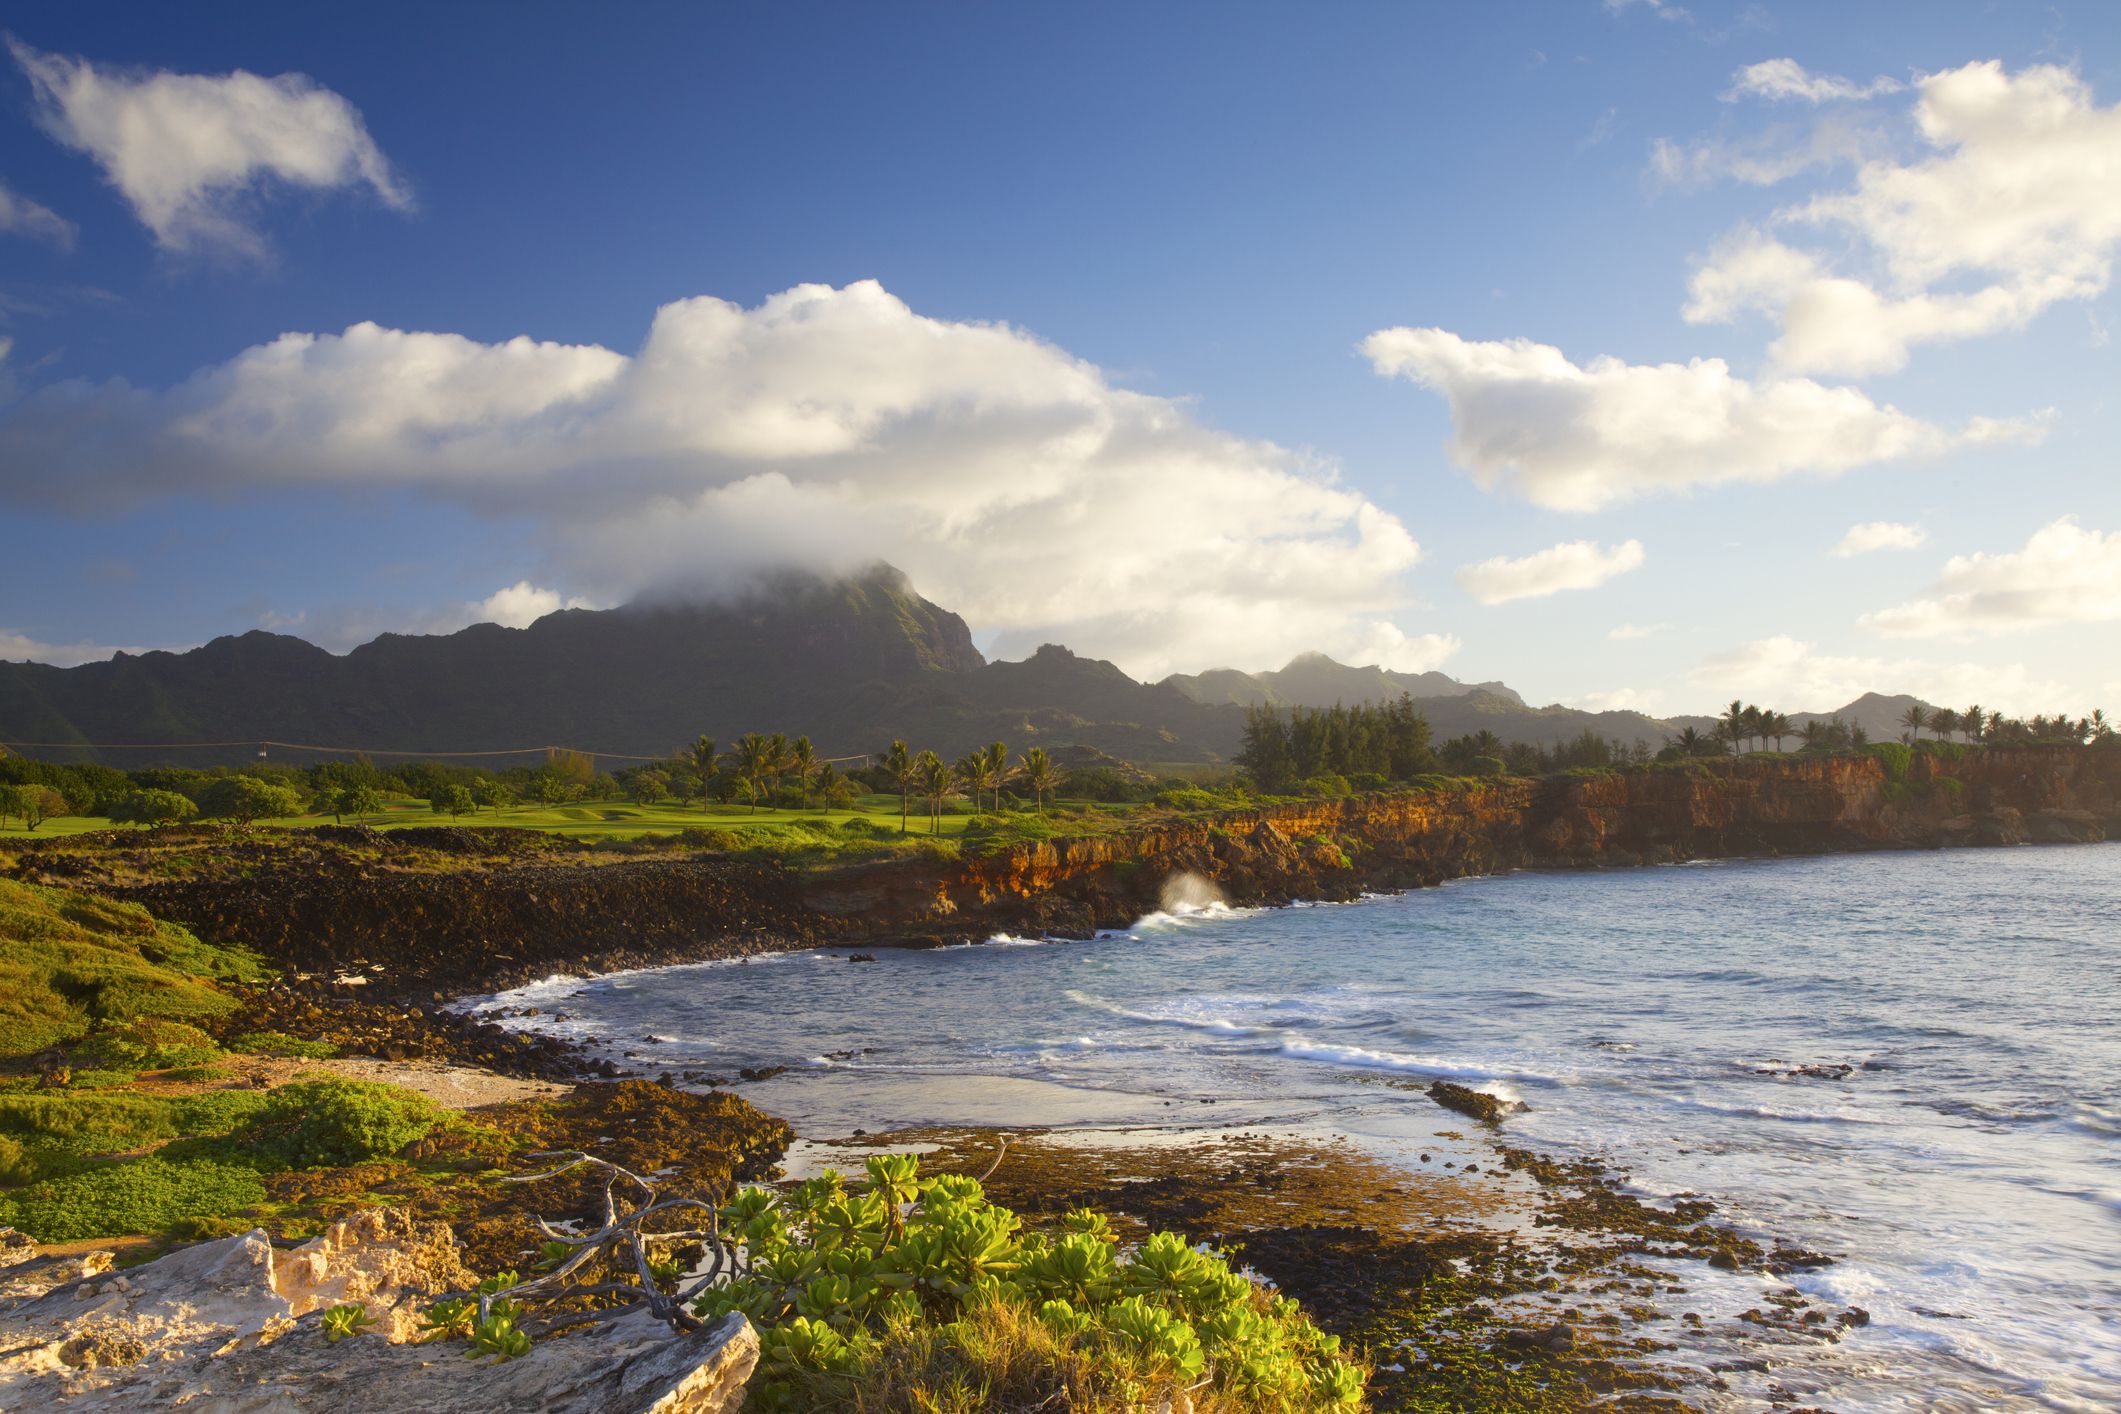 <p>Young adults looking for a more of a small town feel may consider Lihue on the eastern shores of Kauai. Residents enjoy the outdoors on nearby hiking trails and beaches, and can visit local landmarks like the Ninini Point Lighthouse.</p><ul><li>Population: 8,004</li><li>Median Household Income: $83,872</li><li>Cost of Living: 136% of the U.S. average</li><li>Median Rent Price: $2,900</li><li>Home Price-to-Income Ratio: 9.72</li><li>Average Property Tax: 0.28%</li></ul><p class="padding-top-ms u-margin-bottom-ms"><b>Housing Affordability: </b>Lihue is remote and has a tourist-driven economy, which means that housing can be expensive. The rental market is tight and young adults may need time to find a piece of paradise. House values tend to be on the high side as well, with the average over $800,000.</p>